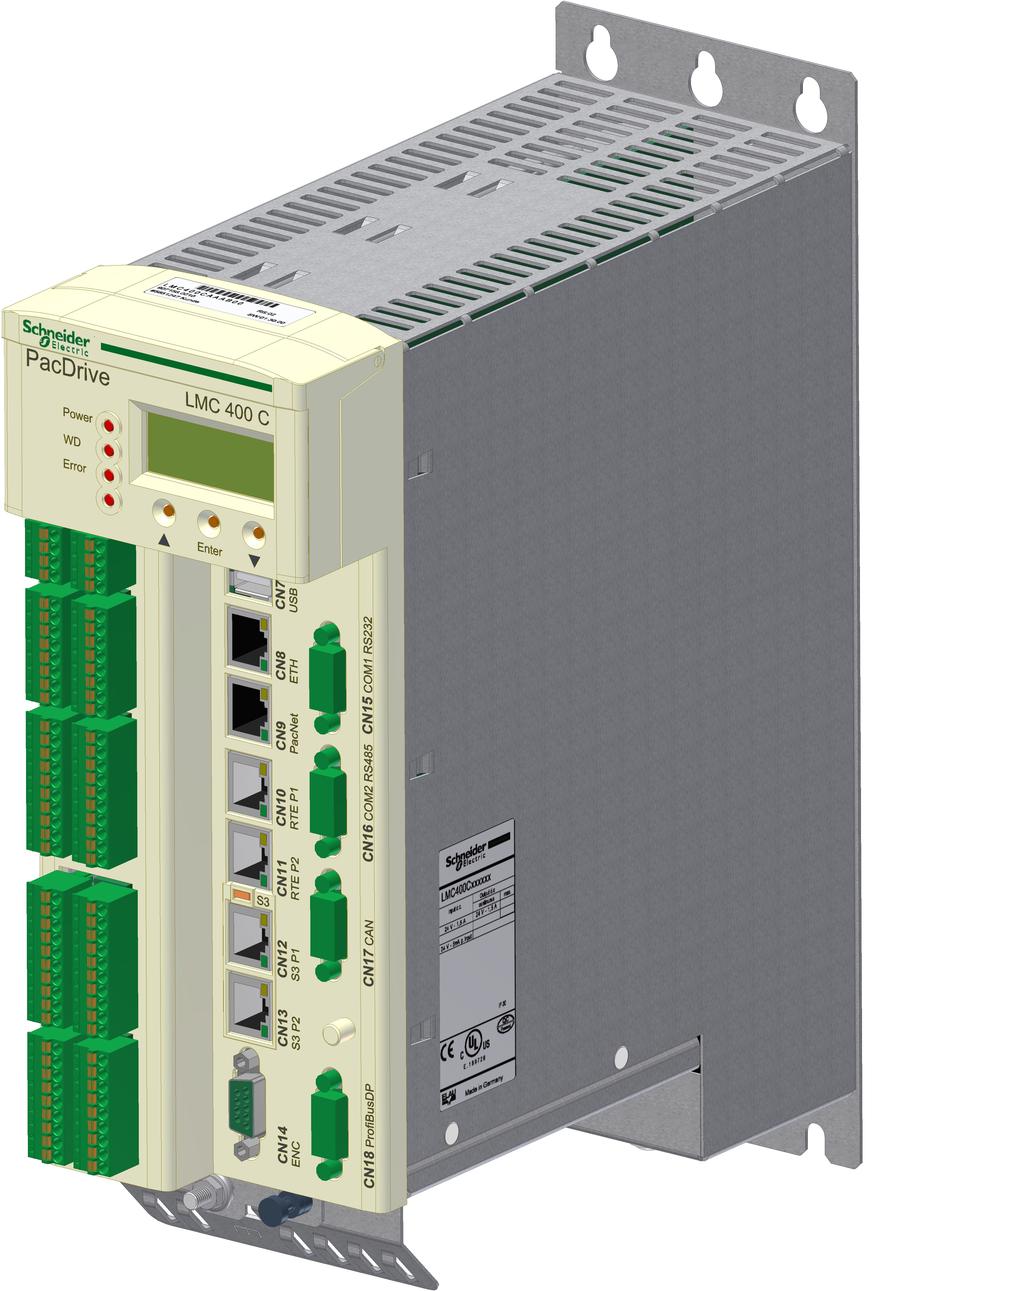 1 1 System overview SoMachine Motion Ethernet, TCP/IP, OPC, FTP, HTTP, SMS, SMTP LMC 100C, 200C, 300C, 400C, 600C, 800C Logic Motion Controllers Safety PLC* Magelis HMI IT/COM Logic Motion SERCOS III